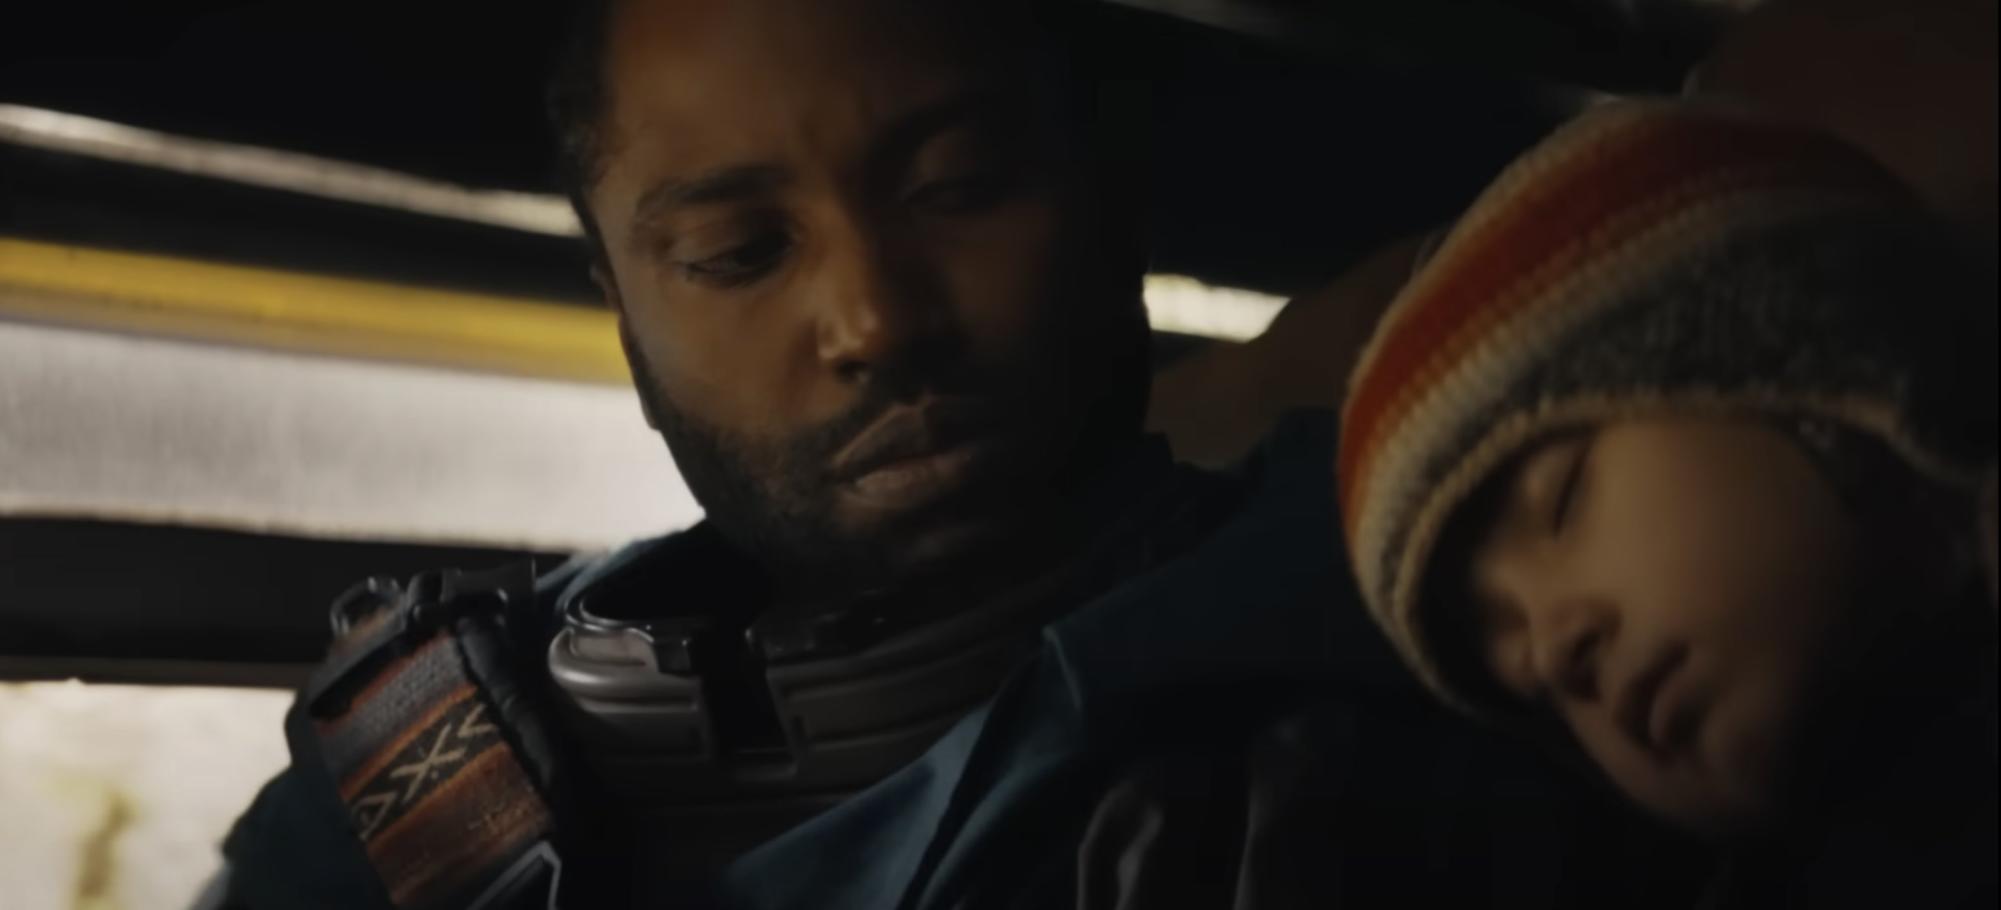 Sergeant Joshua Taylor, portrayed by John David Washington, watches as Alphie, portrayed by Madeleine Yuna Voyles, rests her head on his shoulder.